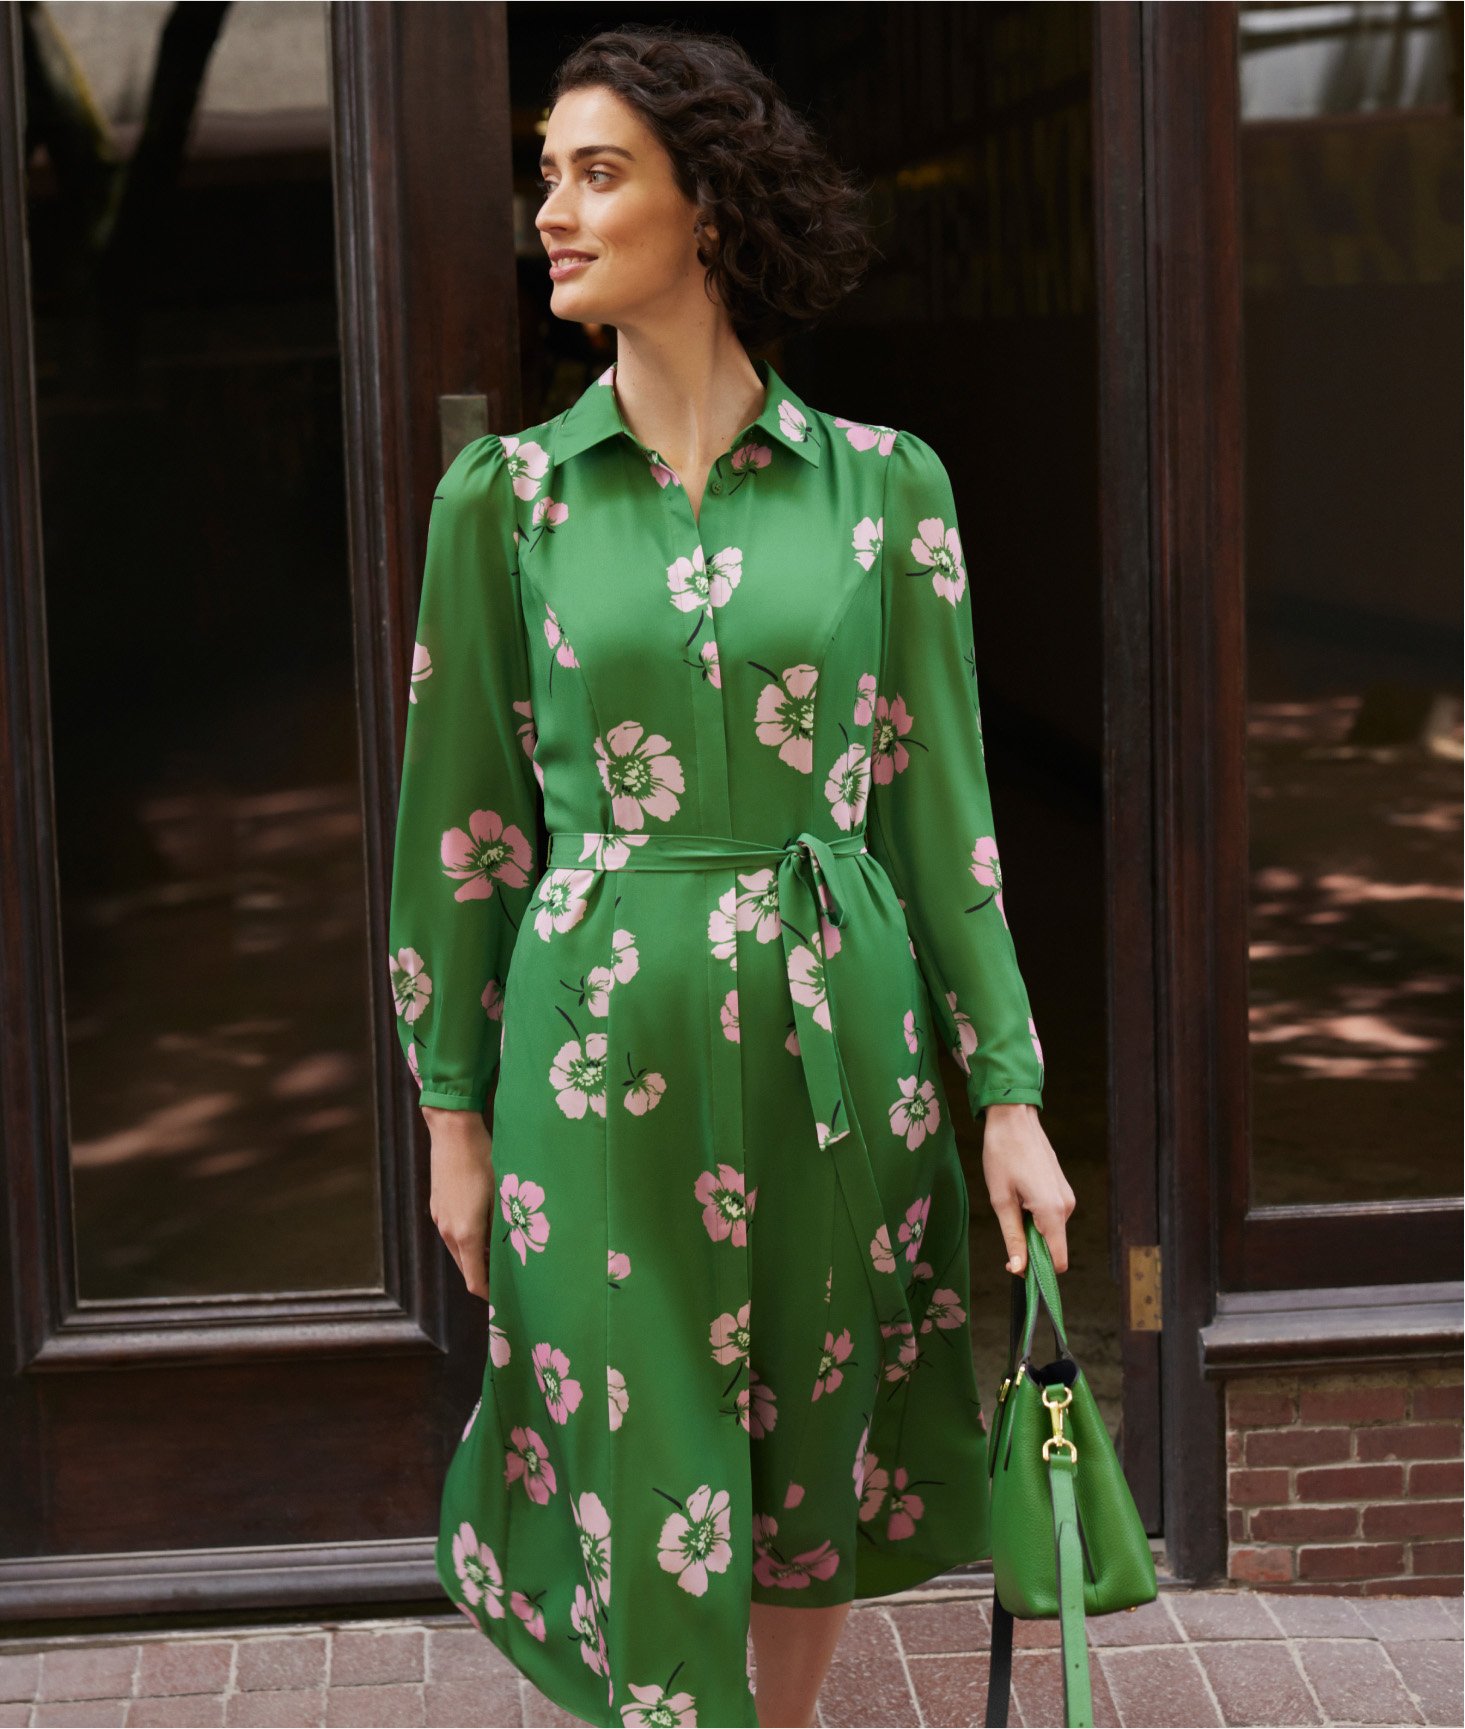 Photo of model leaving a shop wearing a green floral shirt dress.